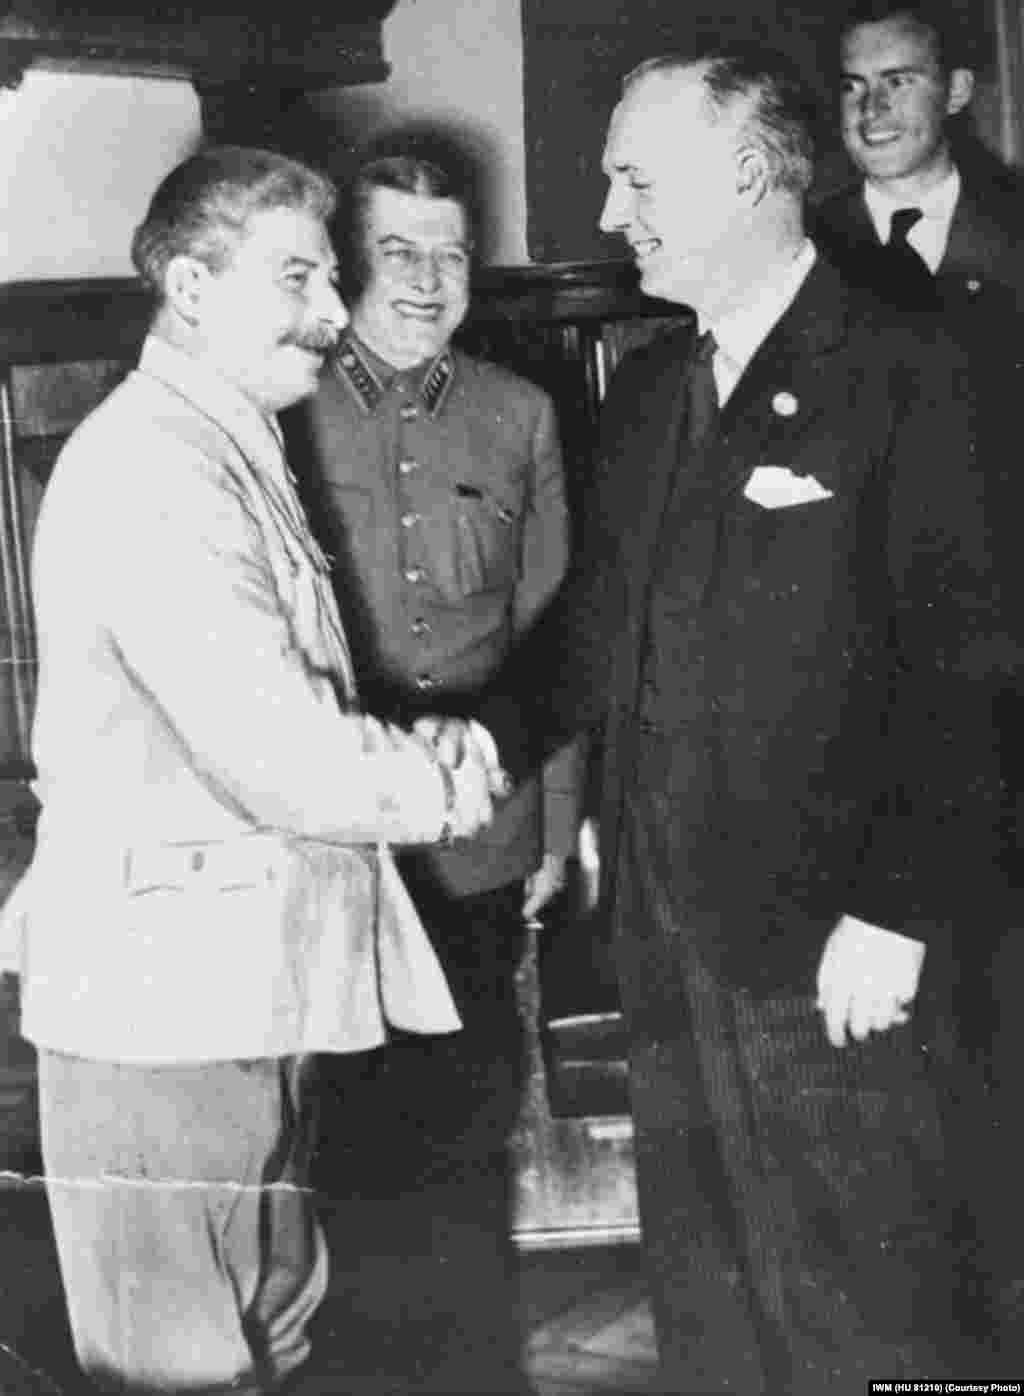 Von Ribbentrop shakes hands with Stalin after signing the Treaty of Friendship, Cooperation, and Demarcation, the continuation of the nonaggression pact.